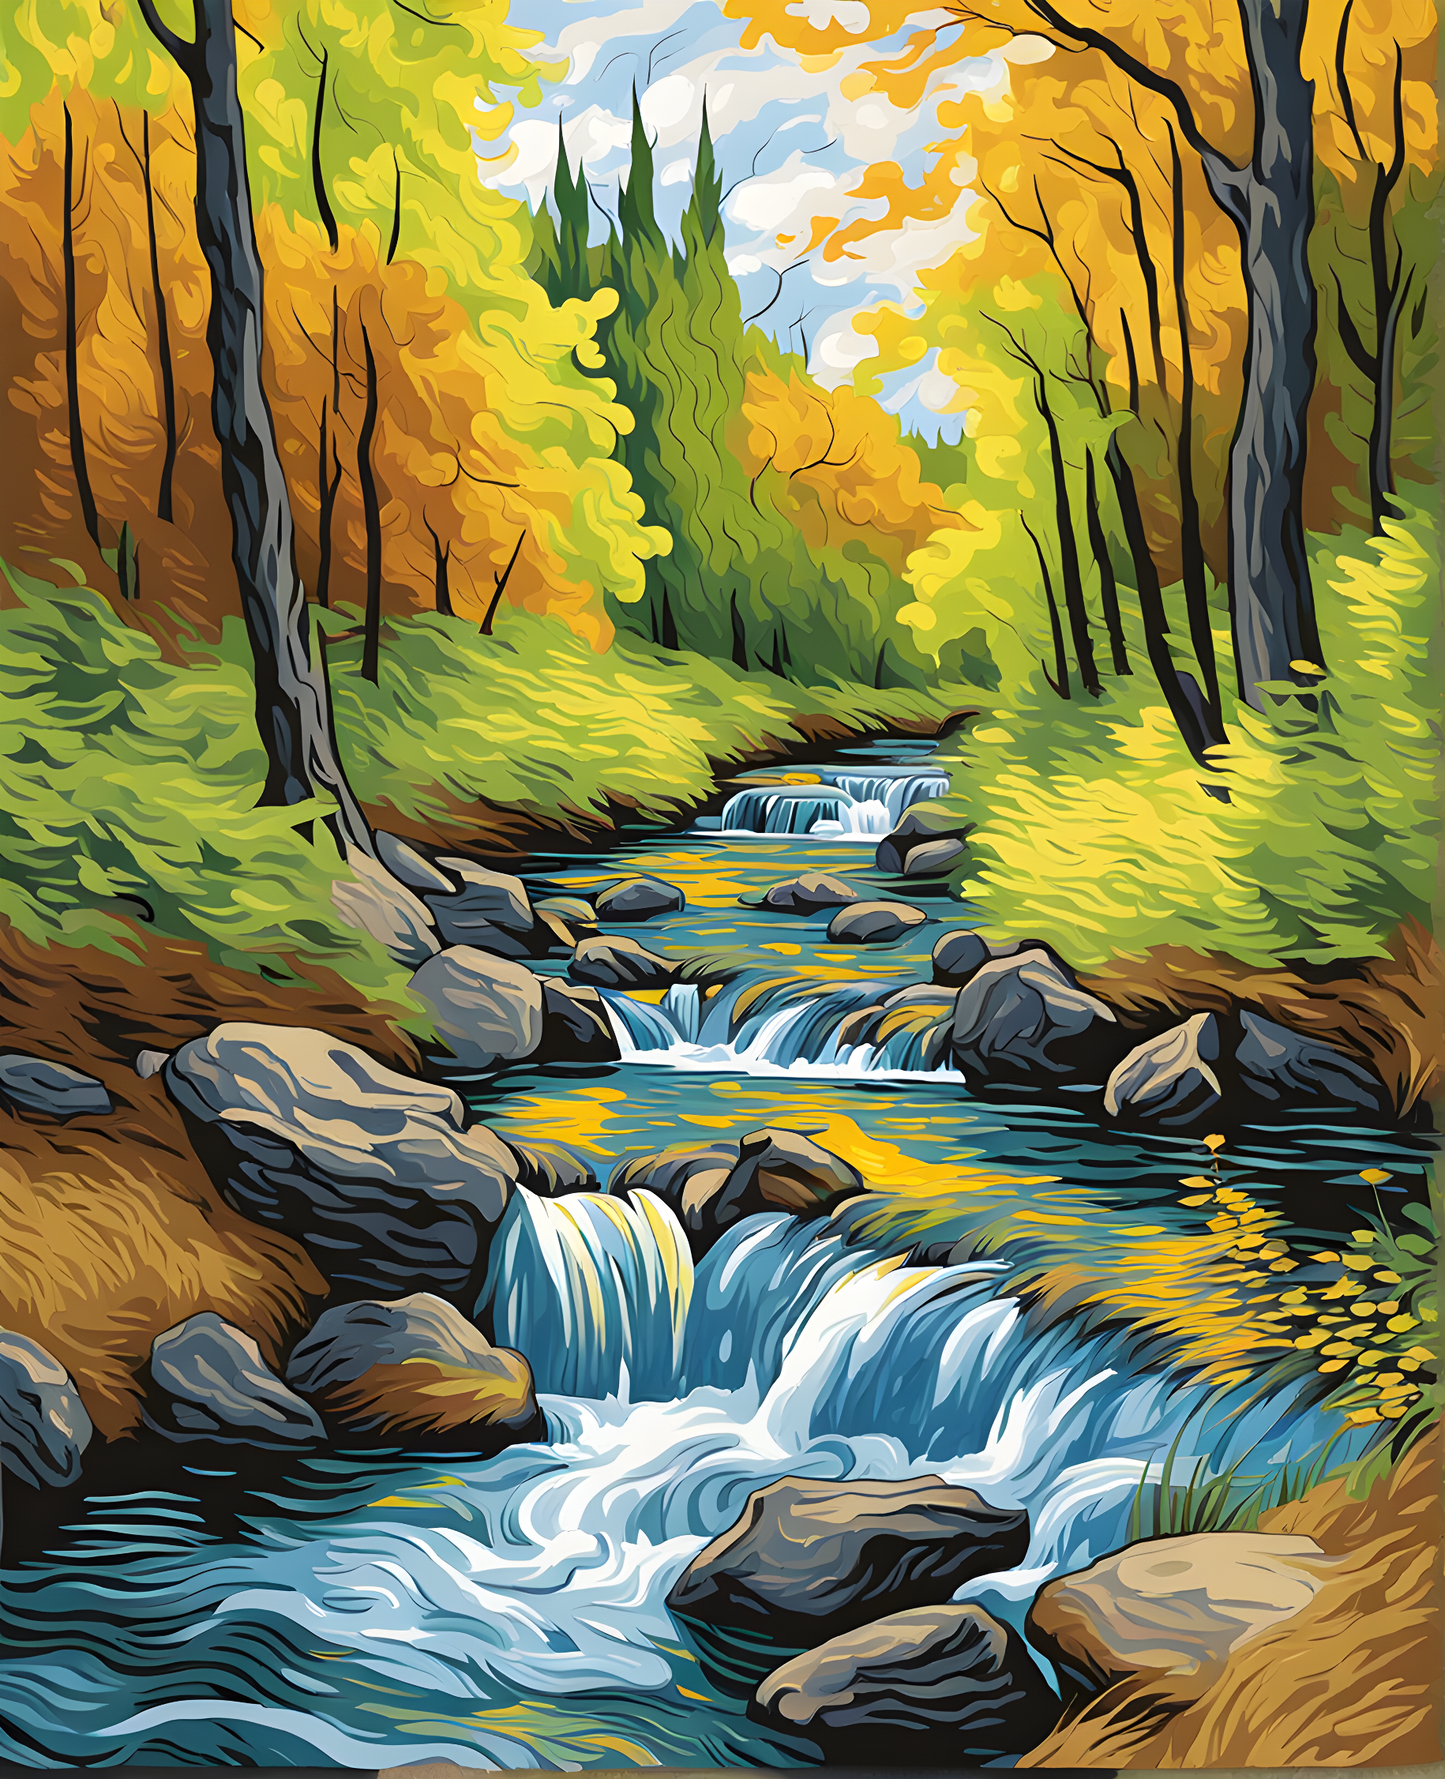 Forest Stream (1) - Van-Go Paint-By-Number